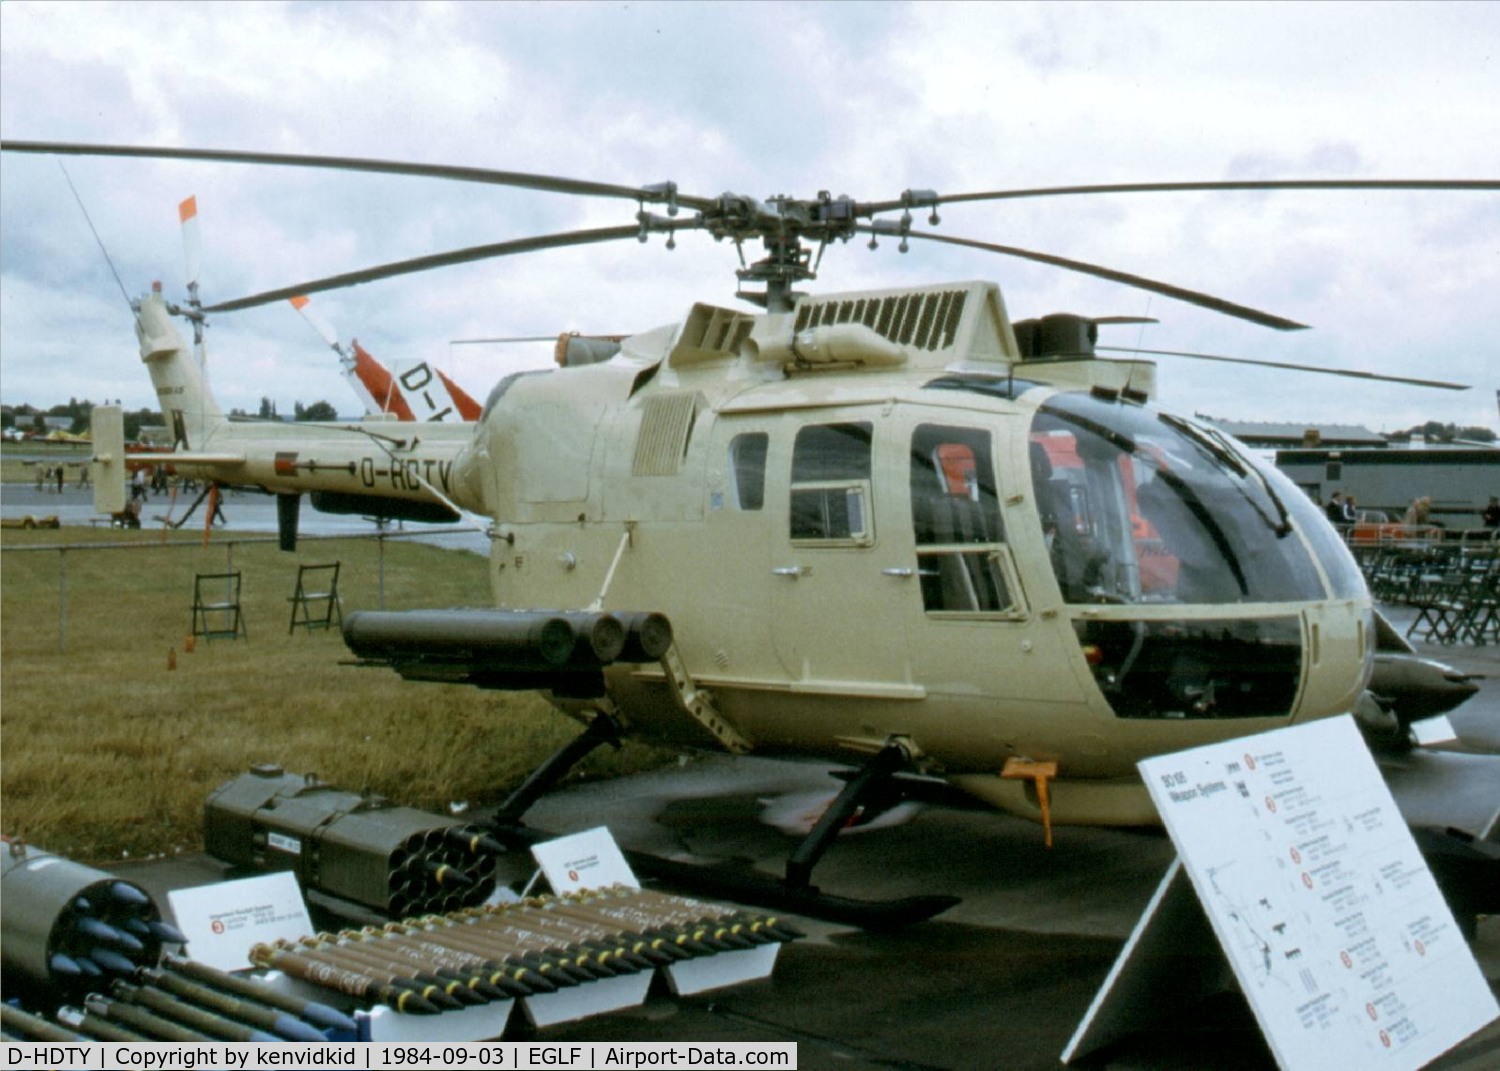 D-HDTY, 1983 MBB Bo-105LS-A1 C/N S-655, At the 1984 Farnborough International Air Show. Scanned from slide.